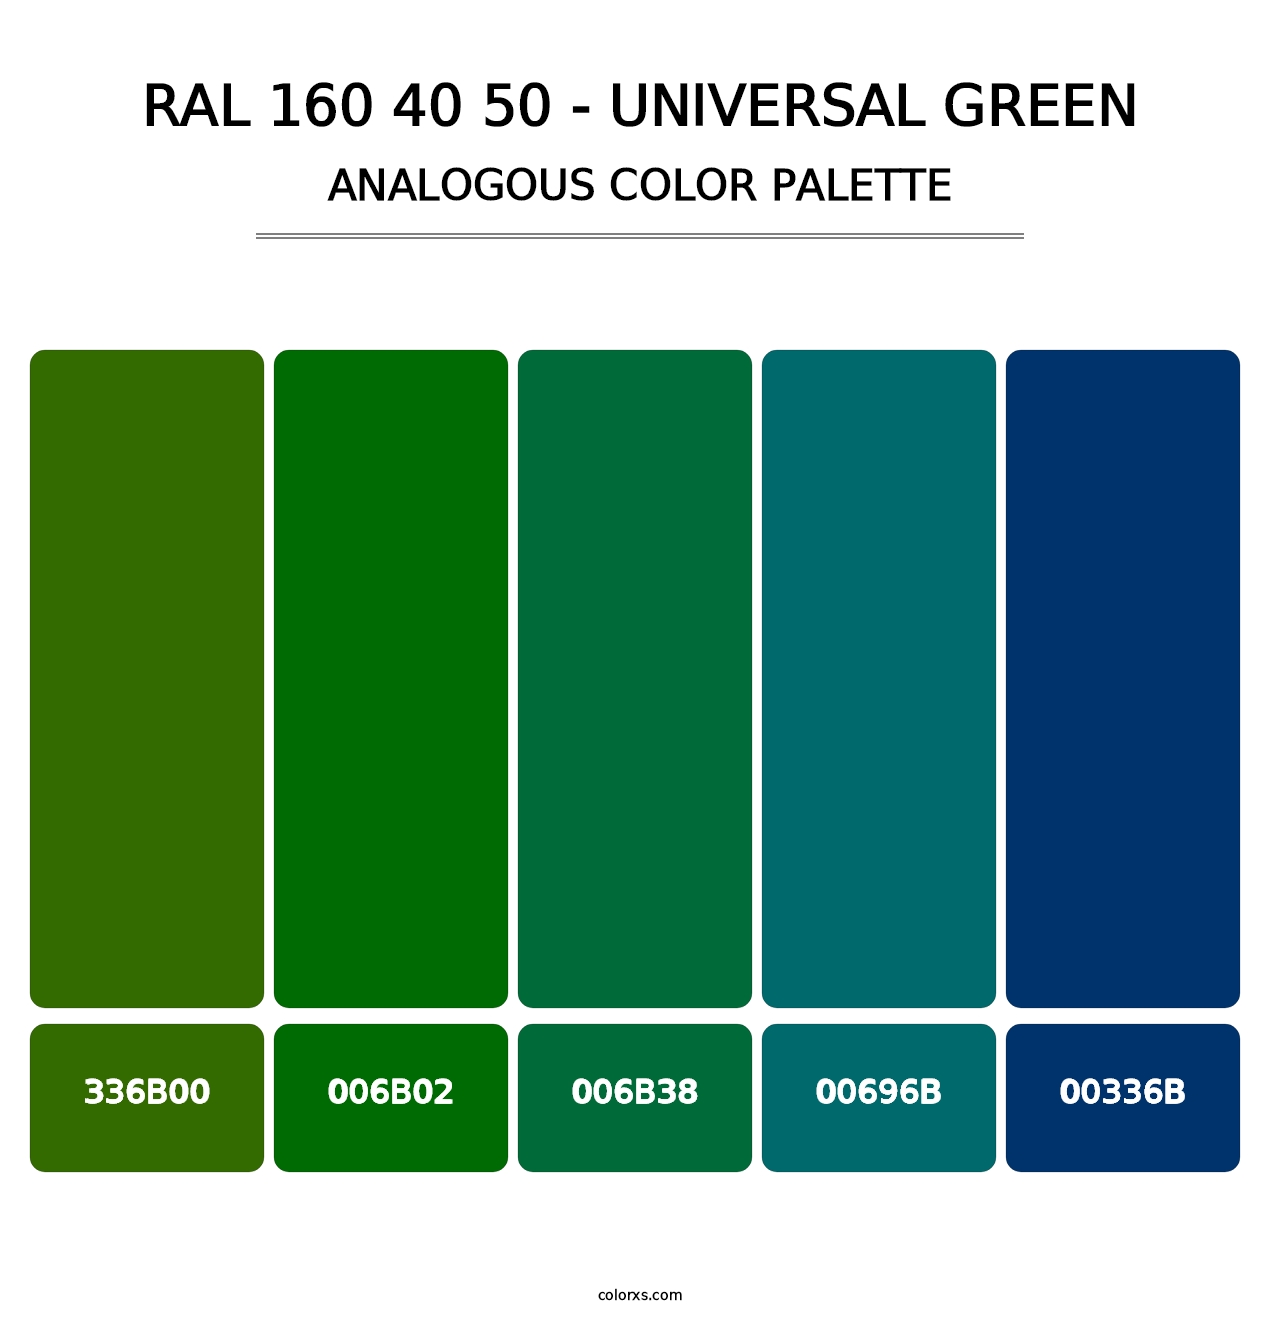 RAL 160 40 50 - Universal Green - Analogous Color Palette